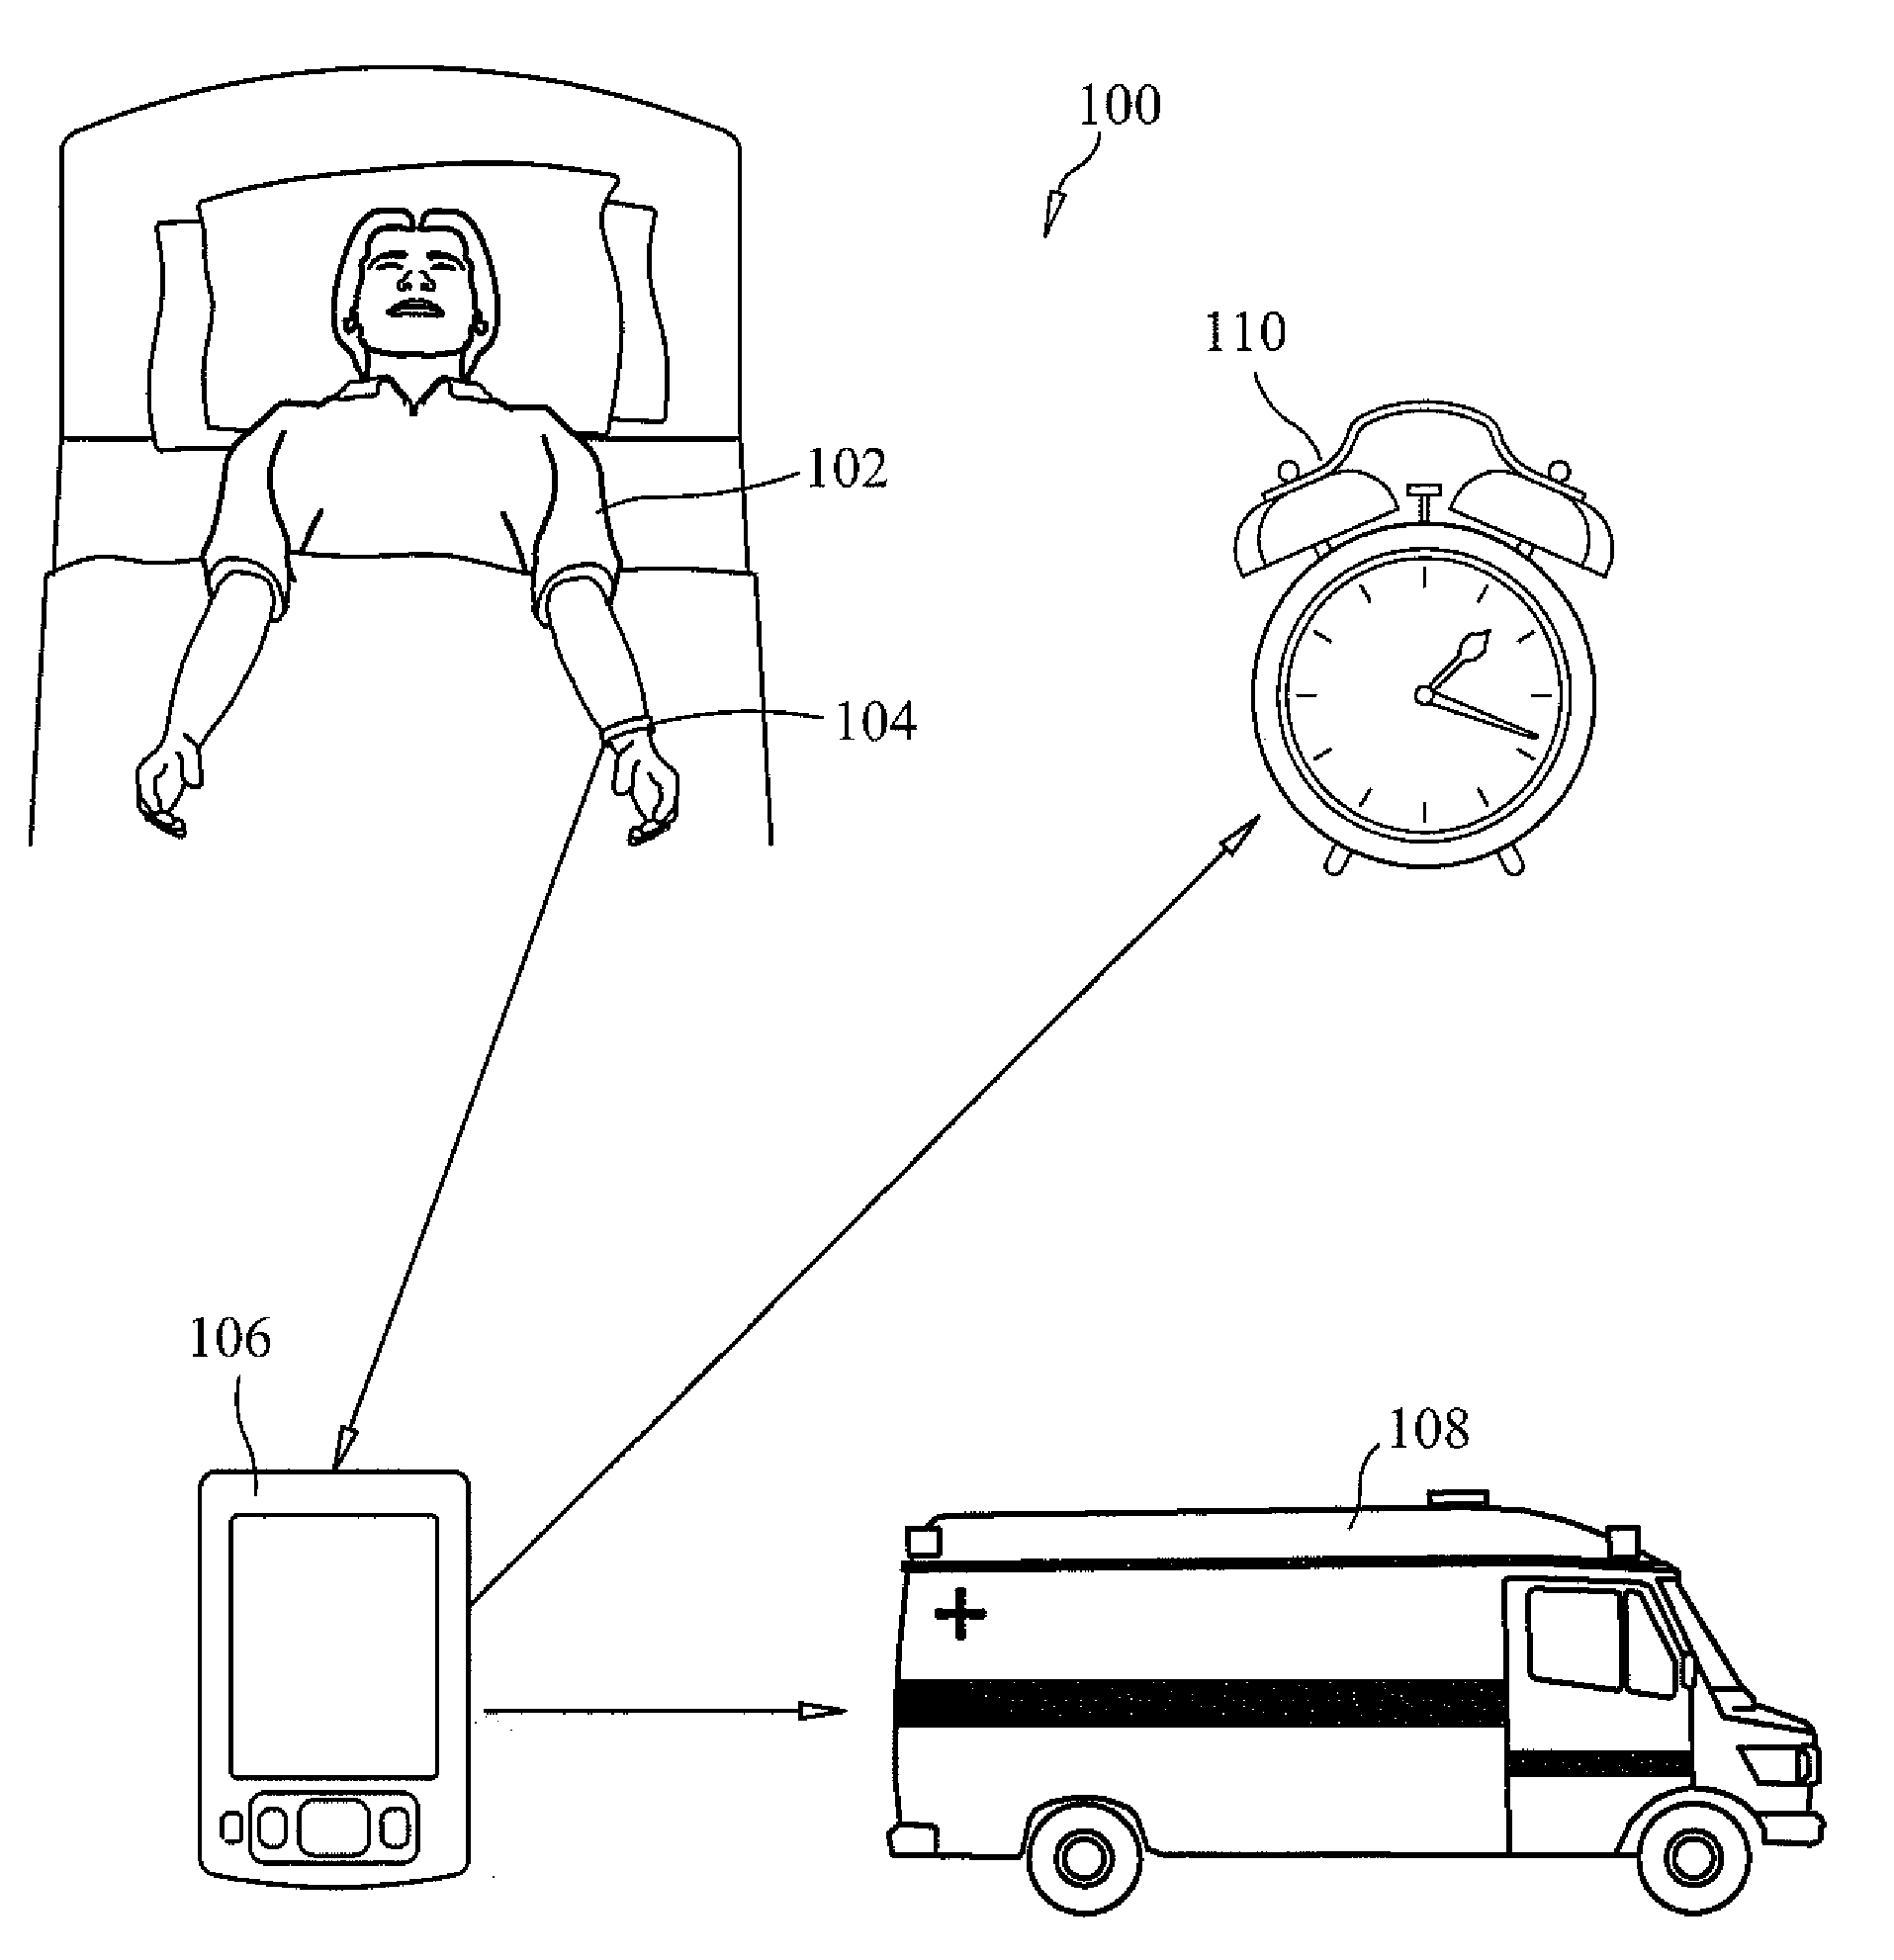 Systems and methods for heart rate monitoring, data transmission, and use